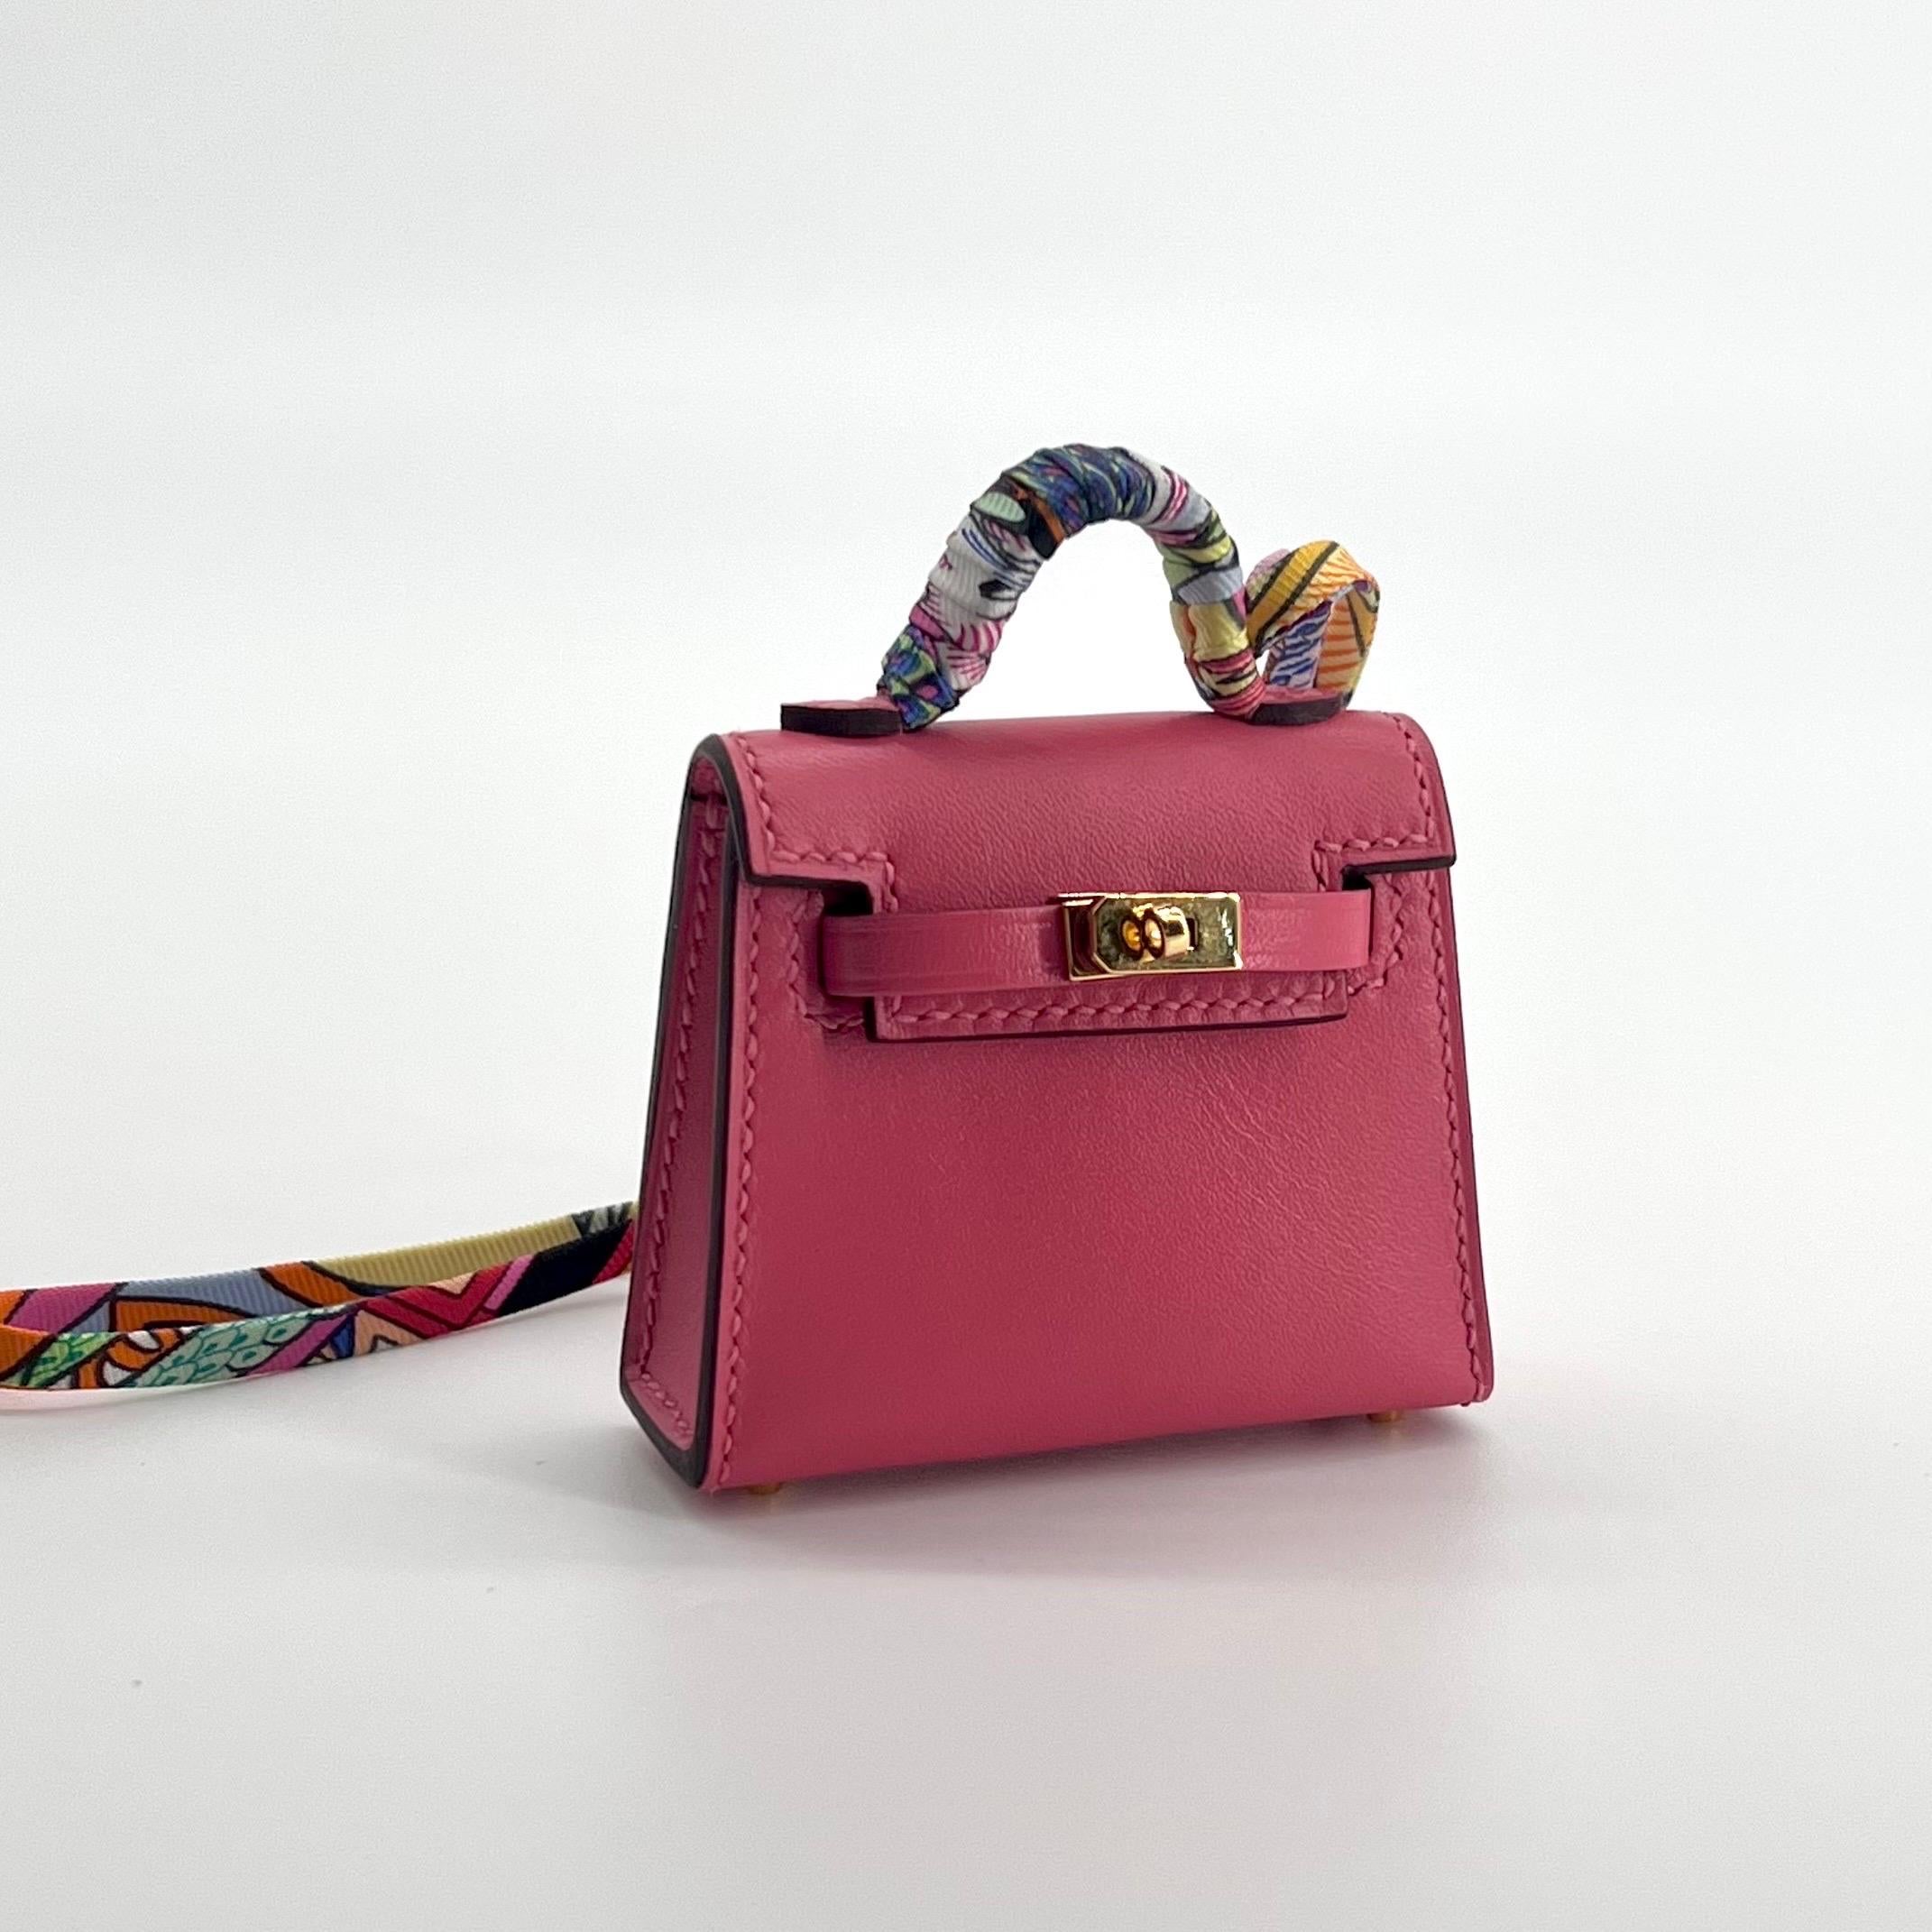 This Micro Kelly Twilly bag charm from Hermès is the smallest Kelly bag. This Hermès Kelly Twilly Charm is made from Veau Tadelakt leather with a Gold Hardware. Similar to swift leather. The beautiful charm is in the colour of Lipstick Pink with a